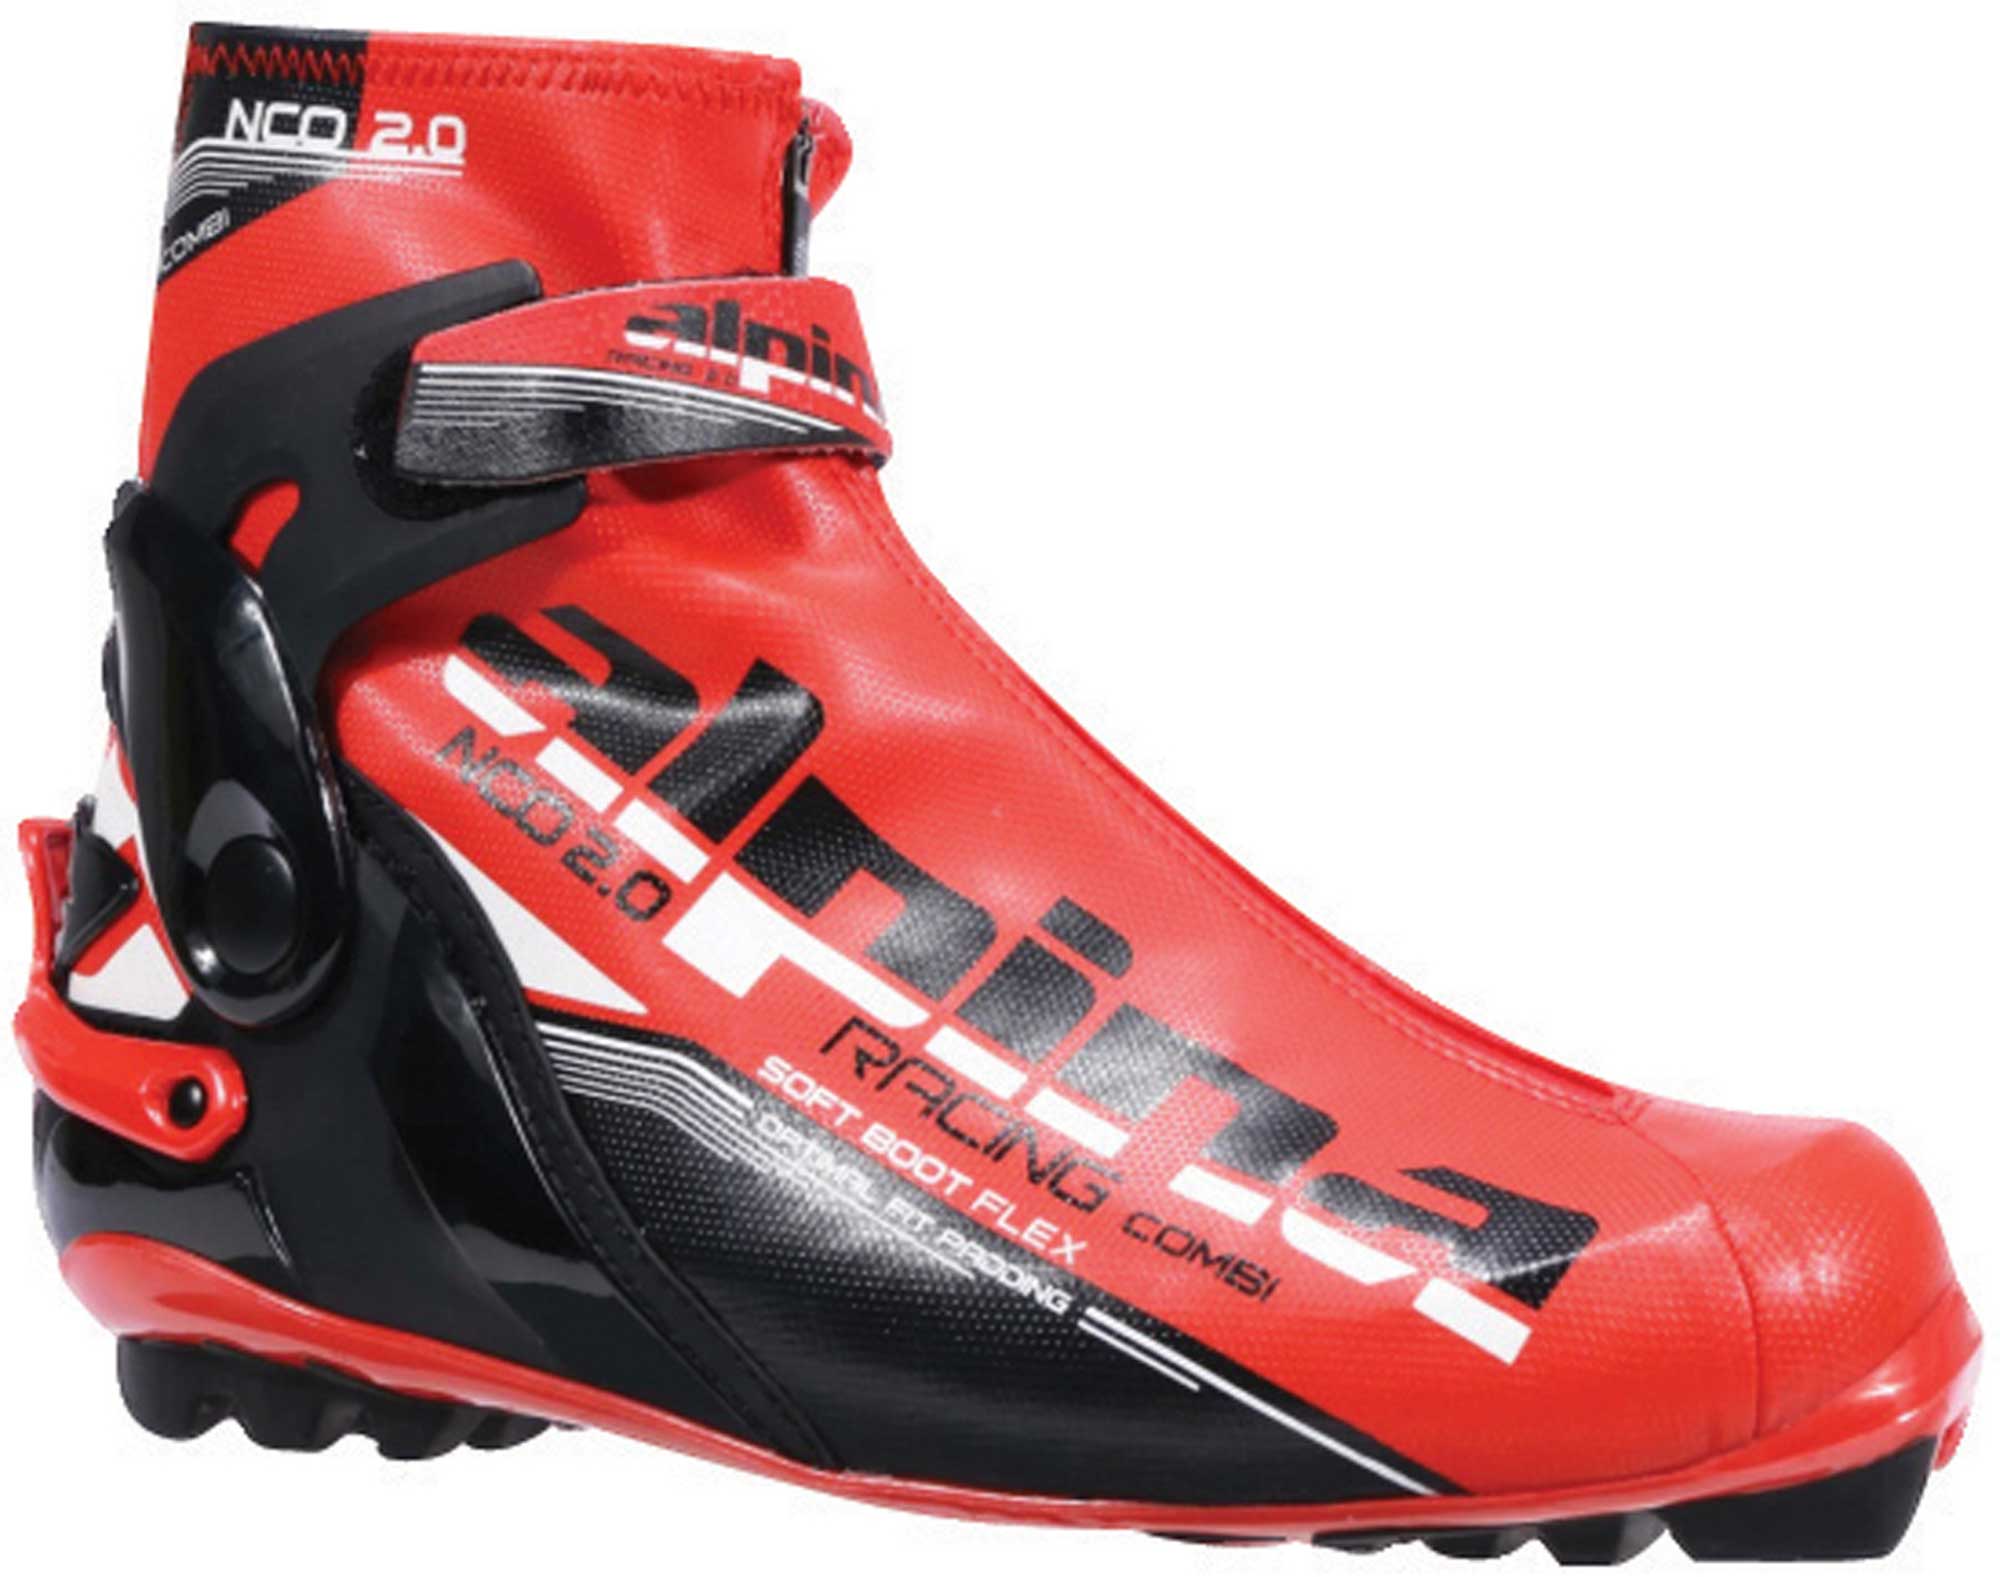 Boots for combination skiing